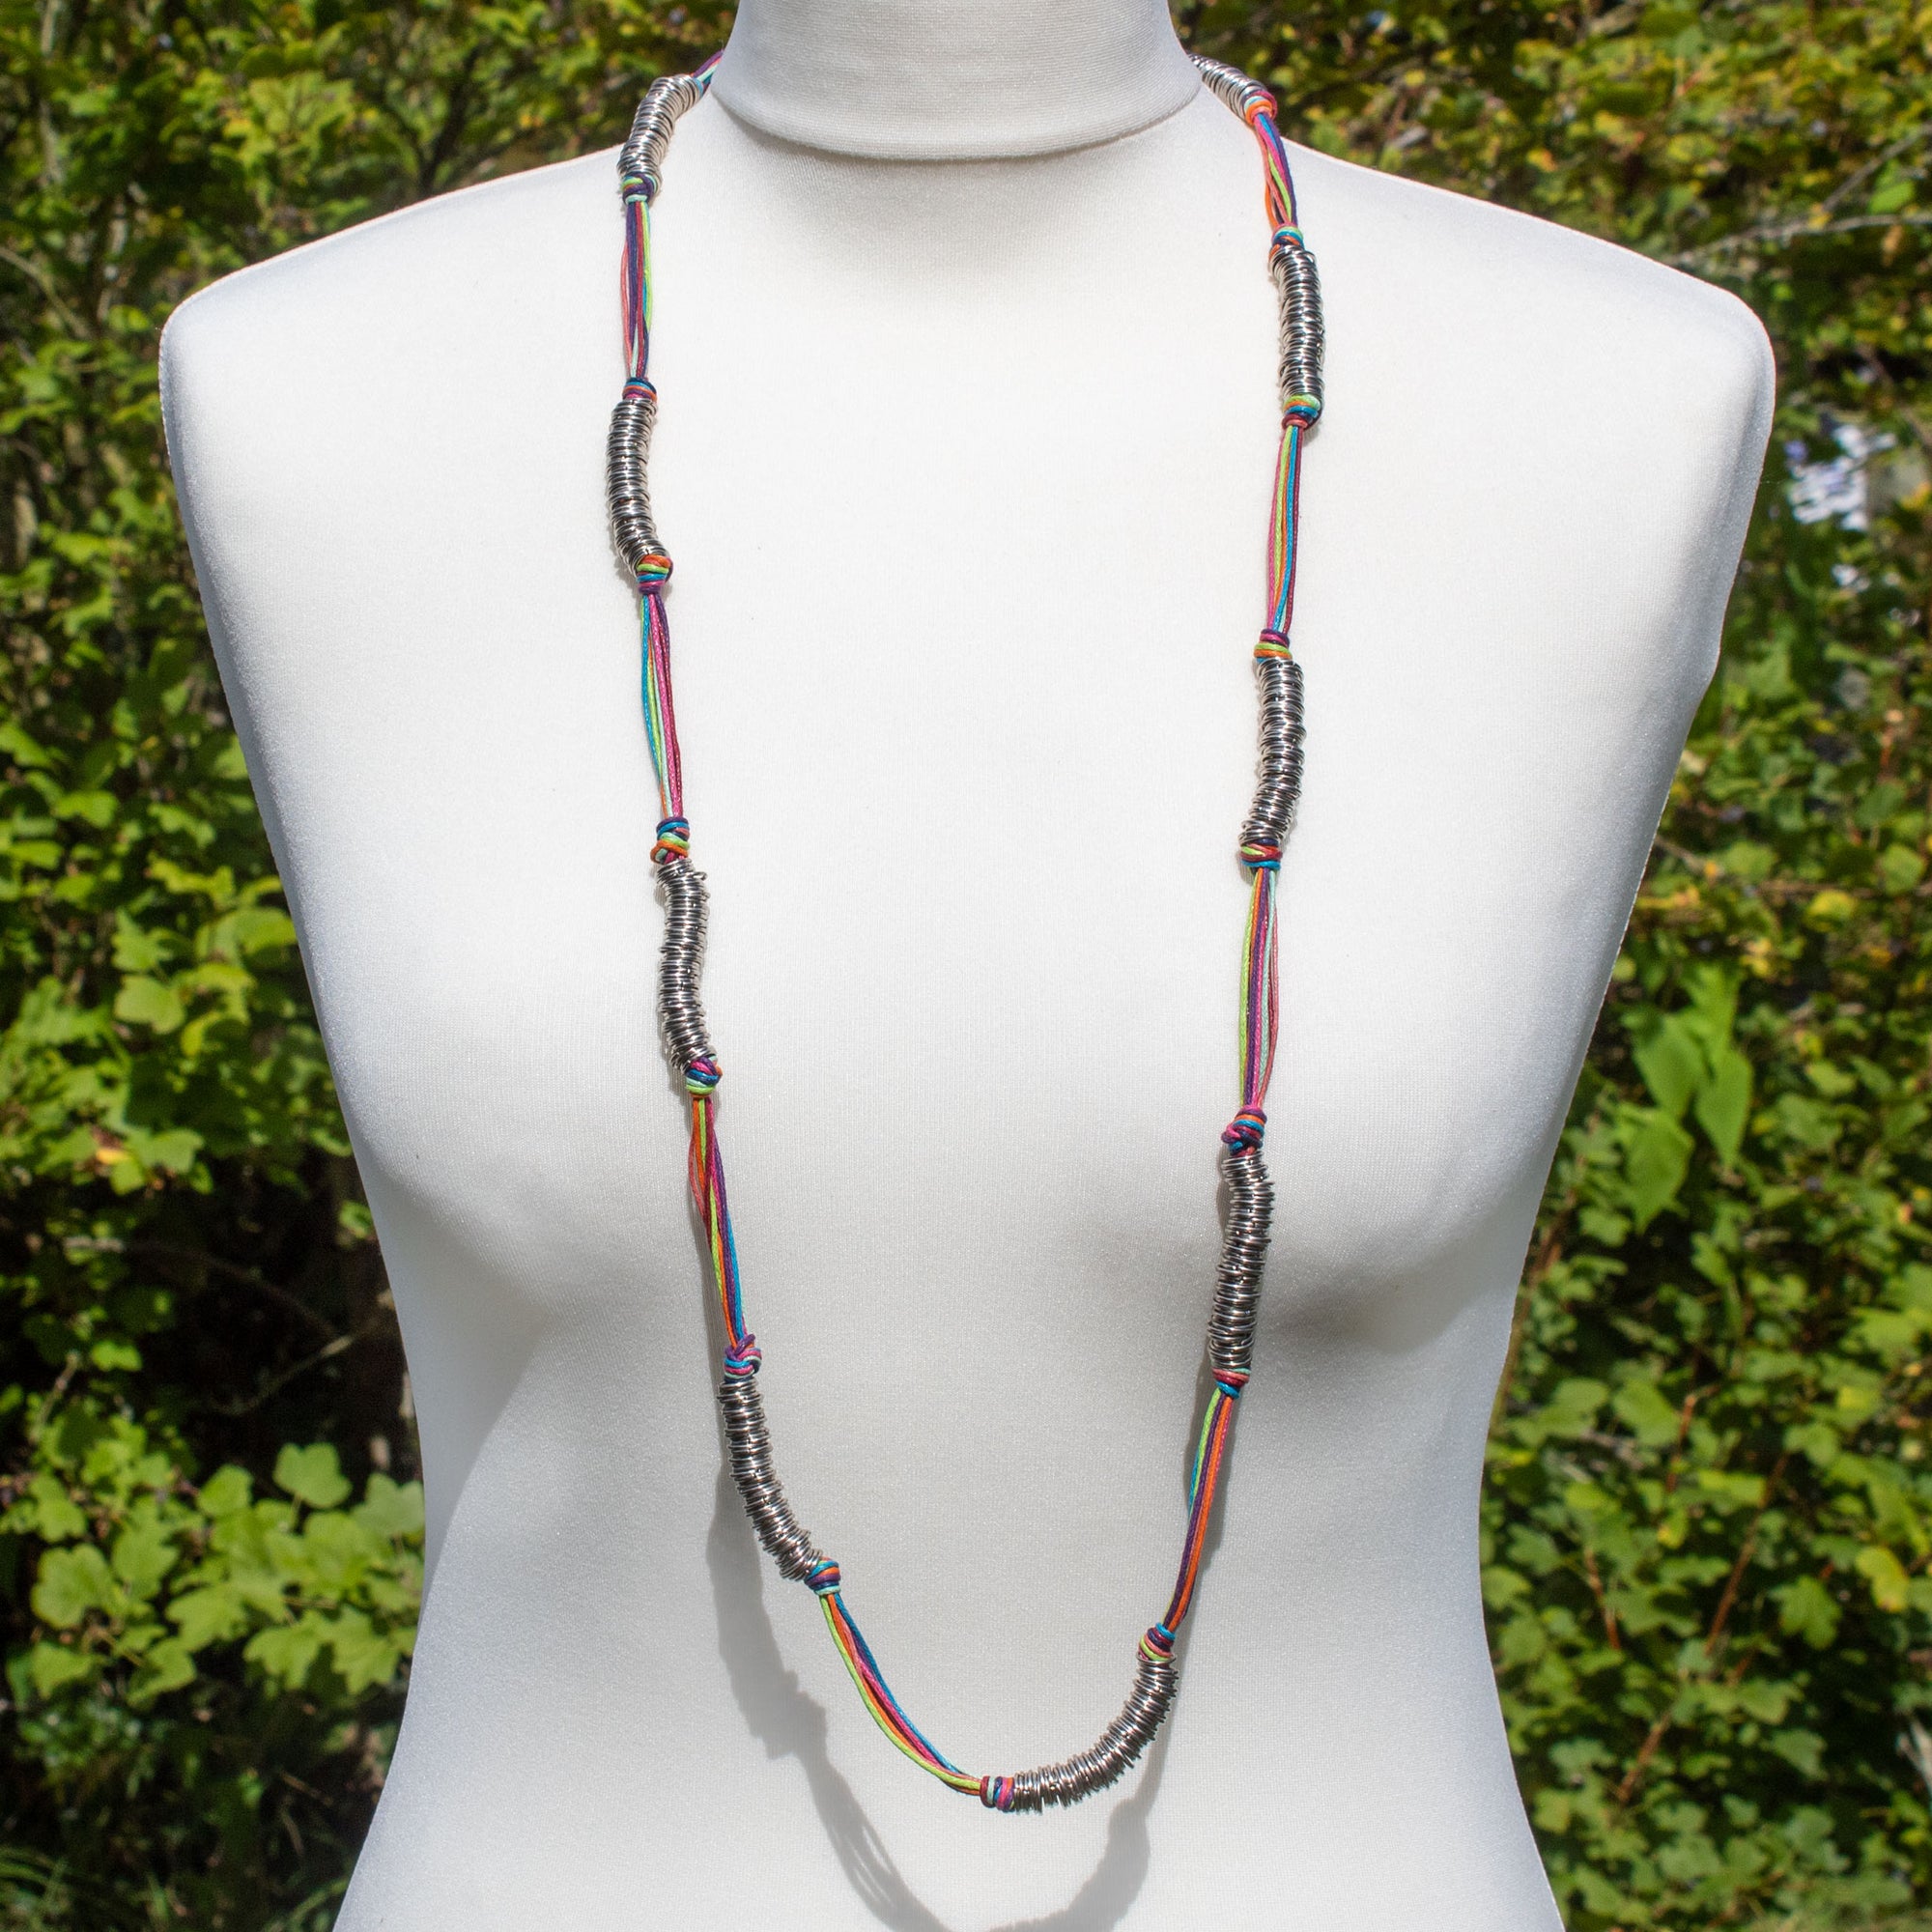 Rainbow Cord & Metallic Silver Ring Necklace | Necklace - The Naughty Shrew